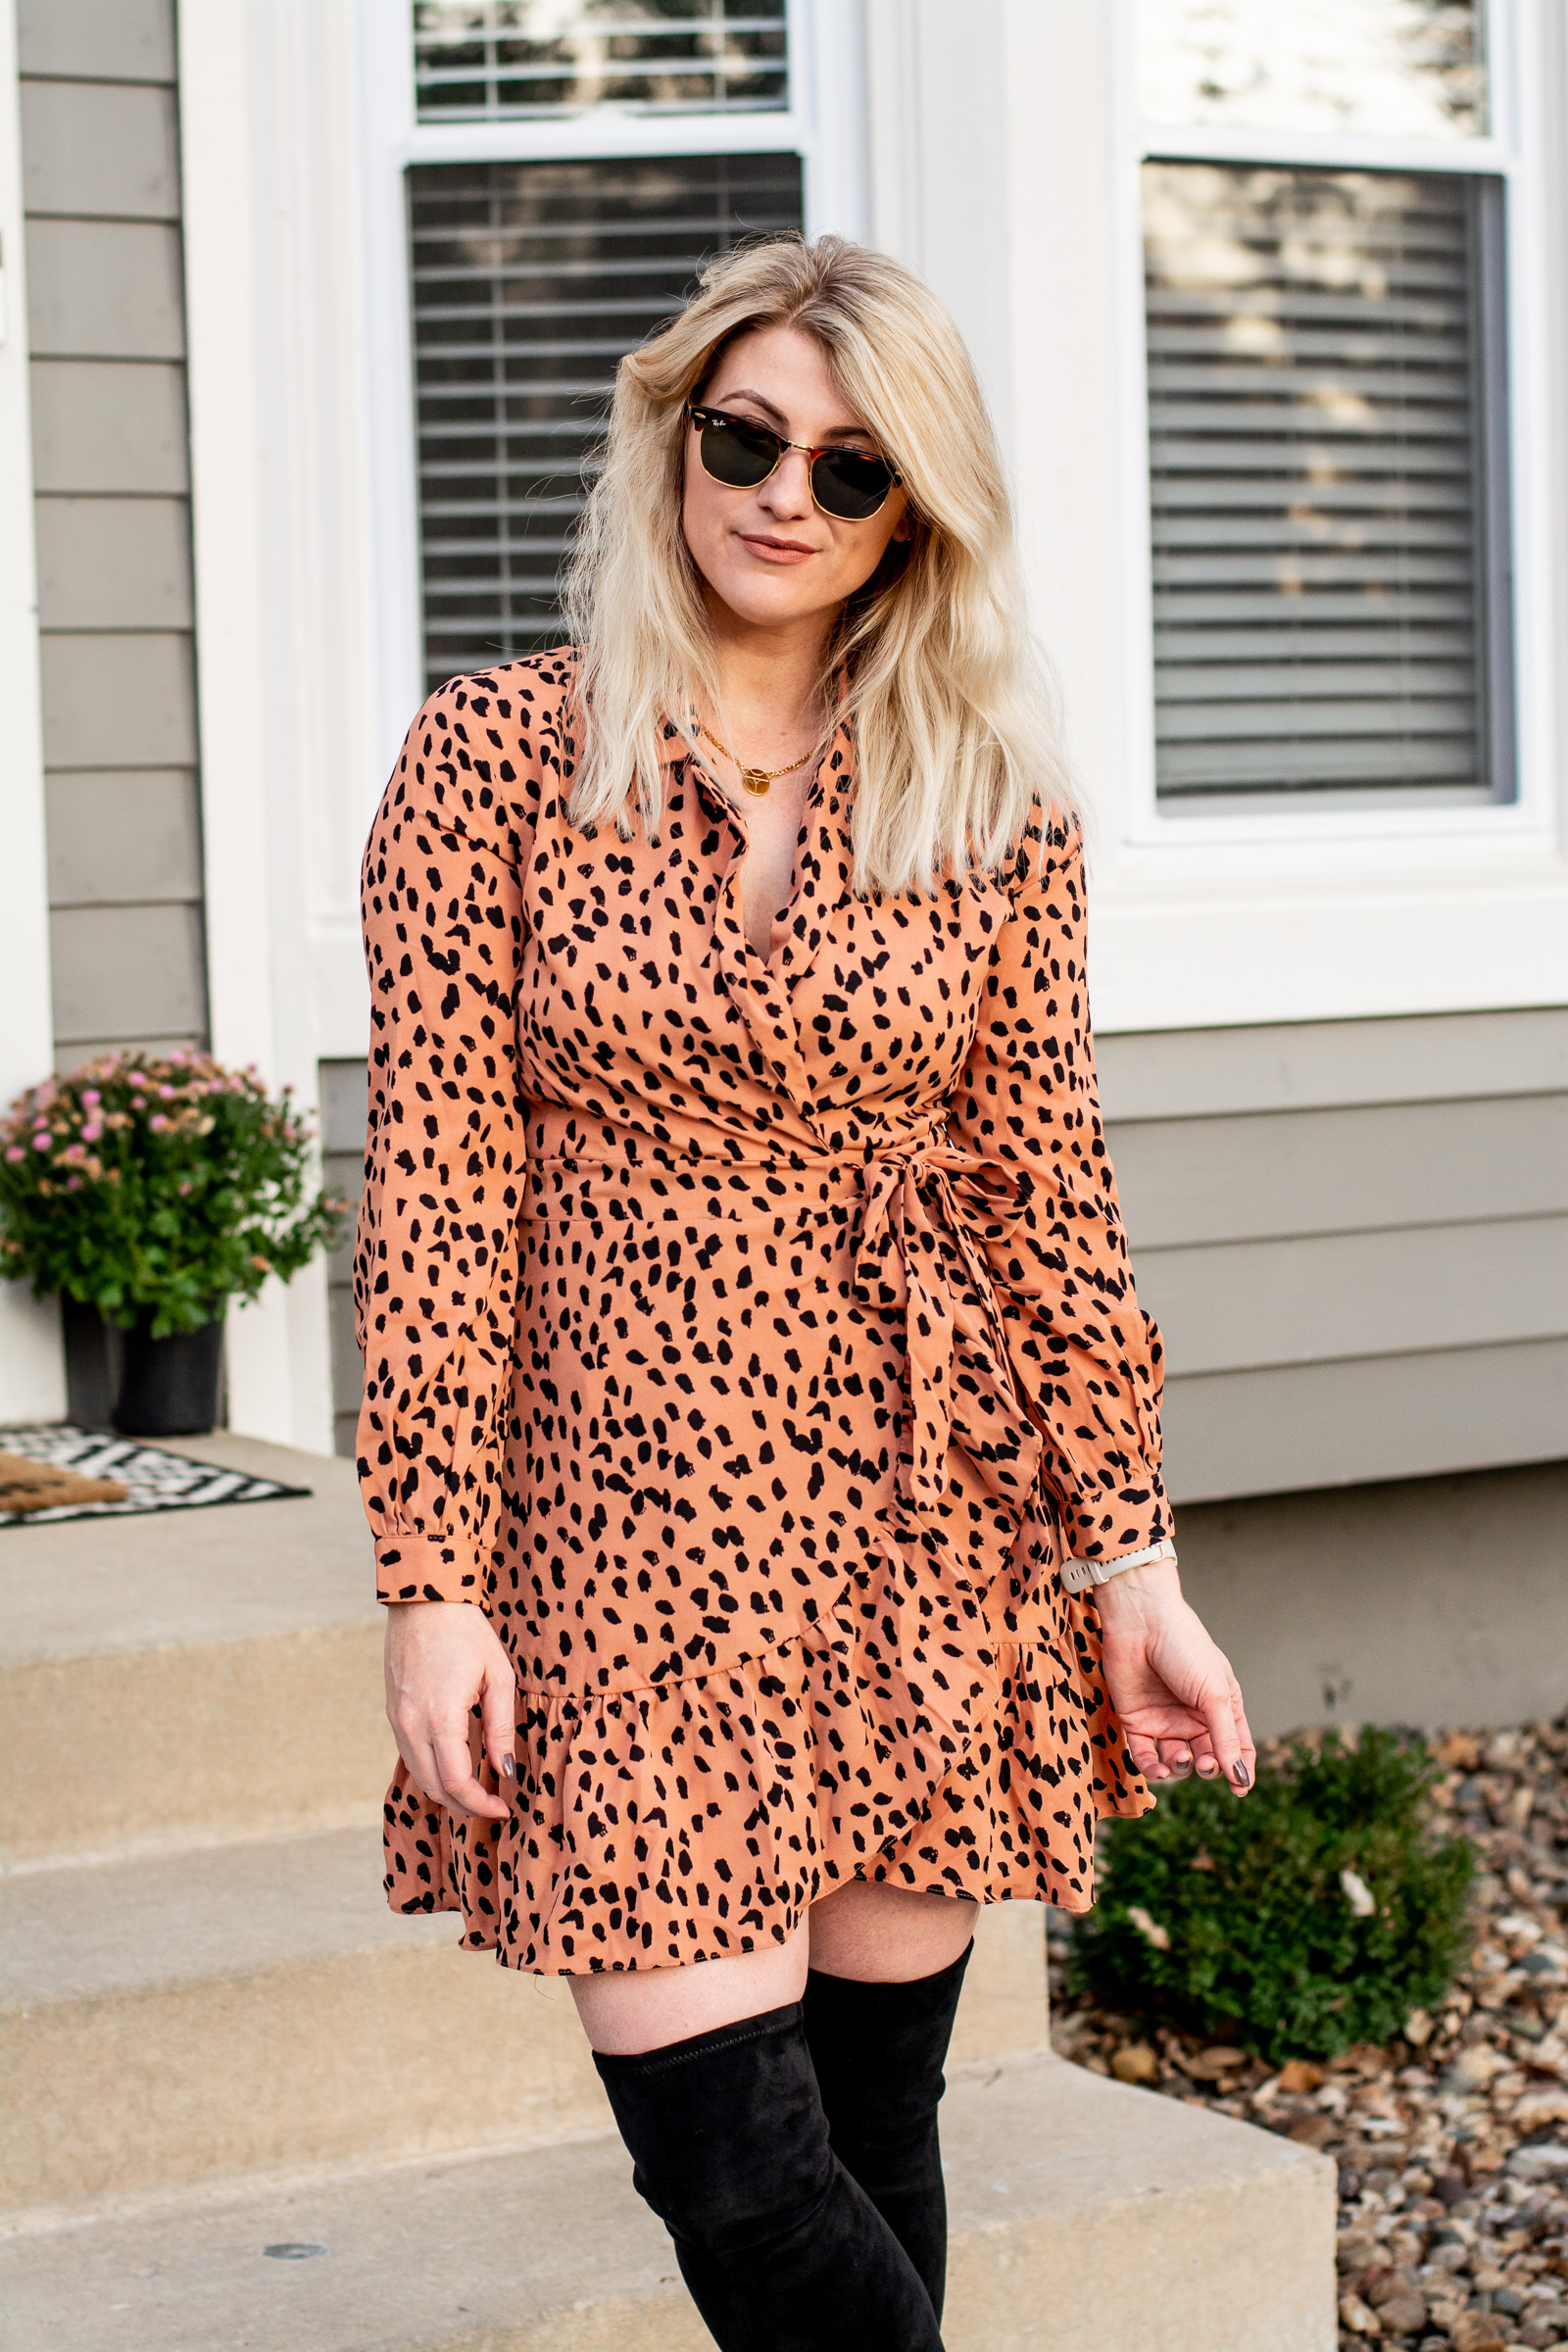 Tall Boots and a Leopard Dress for the Holidays. | LSR